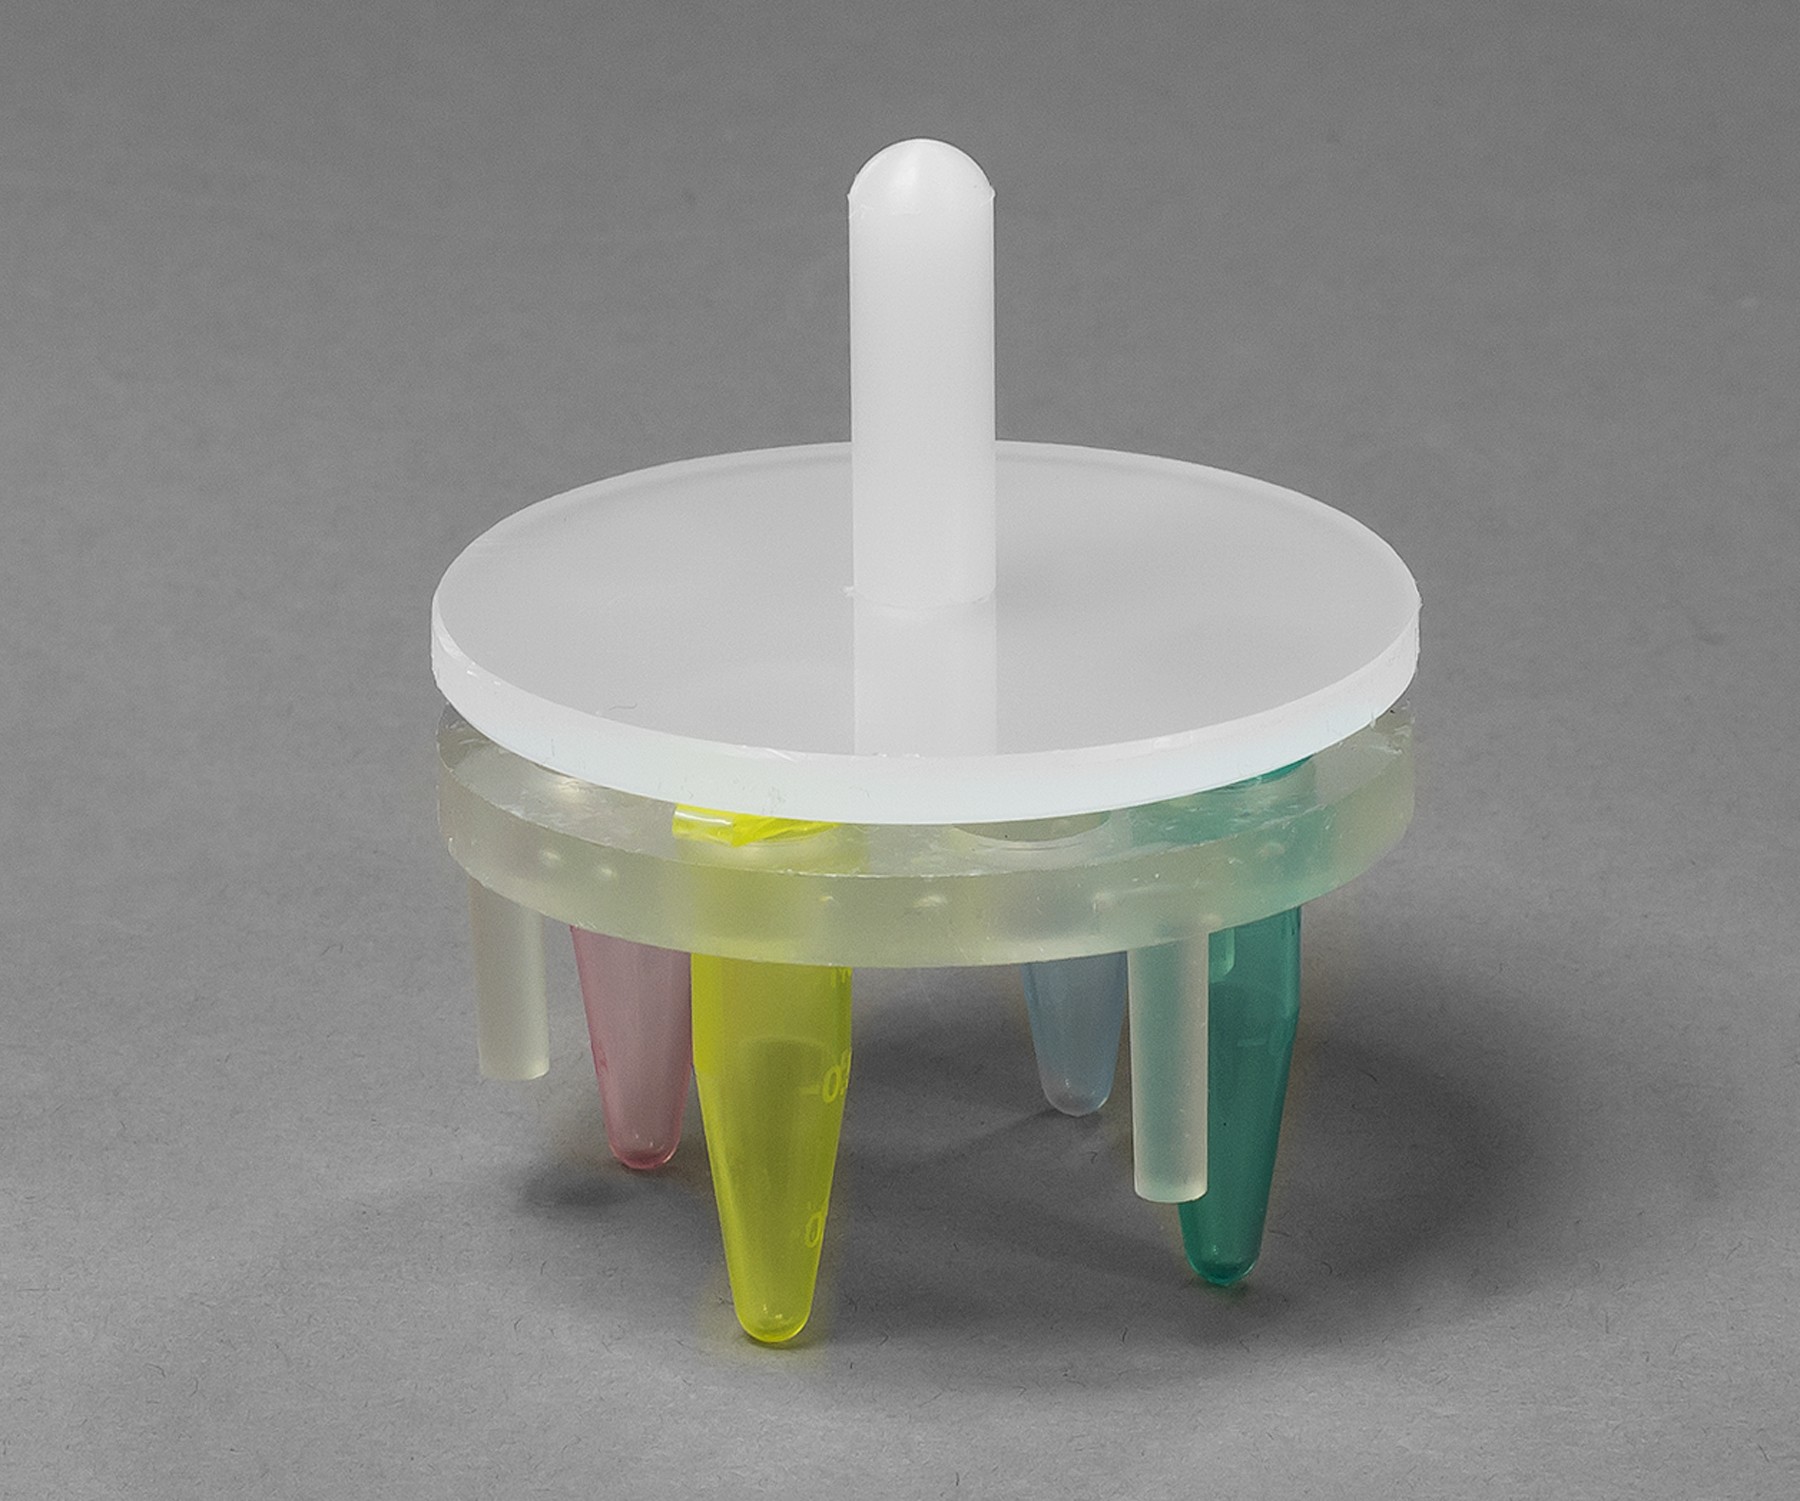 SP Bel-Art Round Microcentrifuge Floating Bubble Rack with Hold-Down Disk; For 1.5ml Tubes, 8 Places, Fits 400ml Beaker